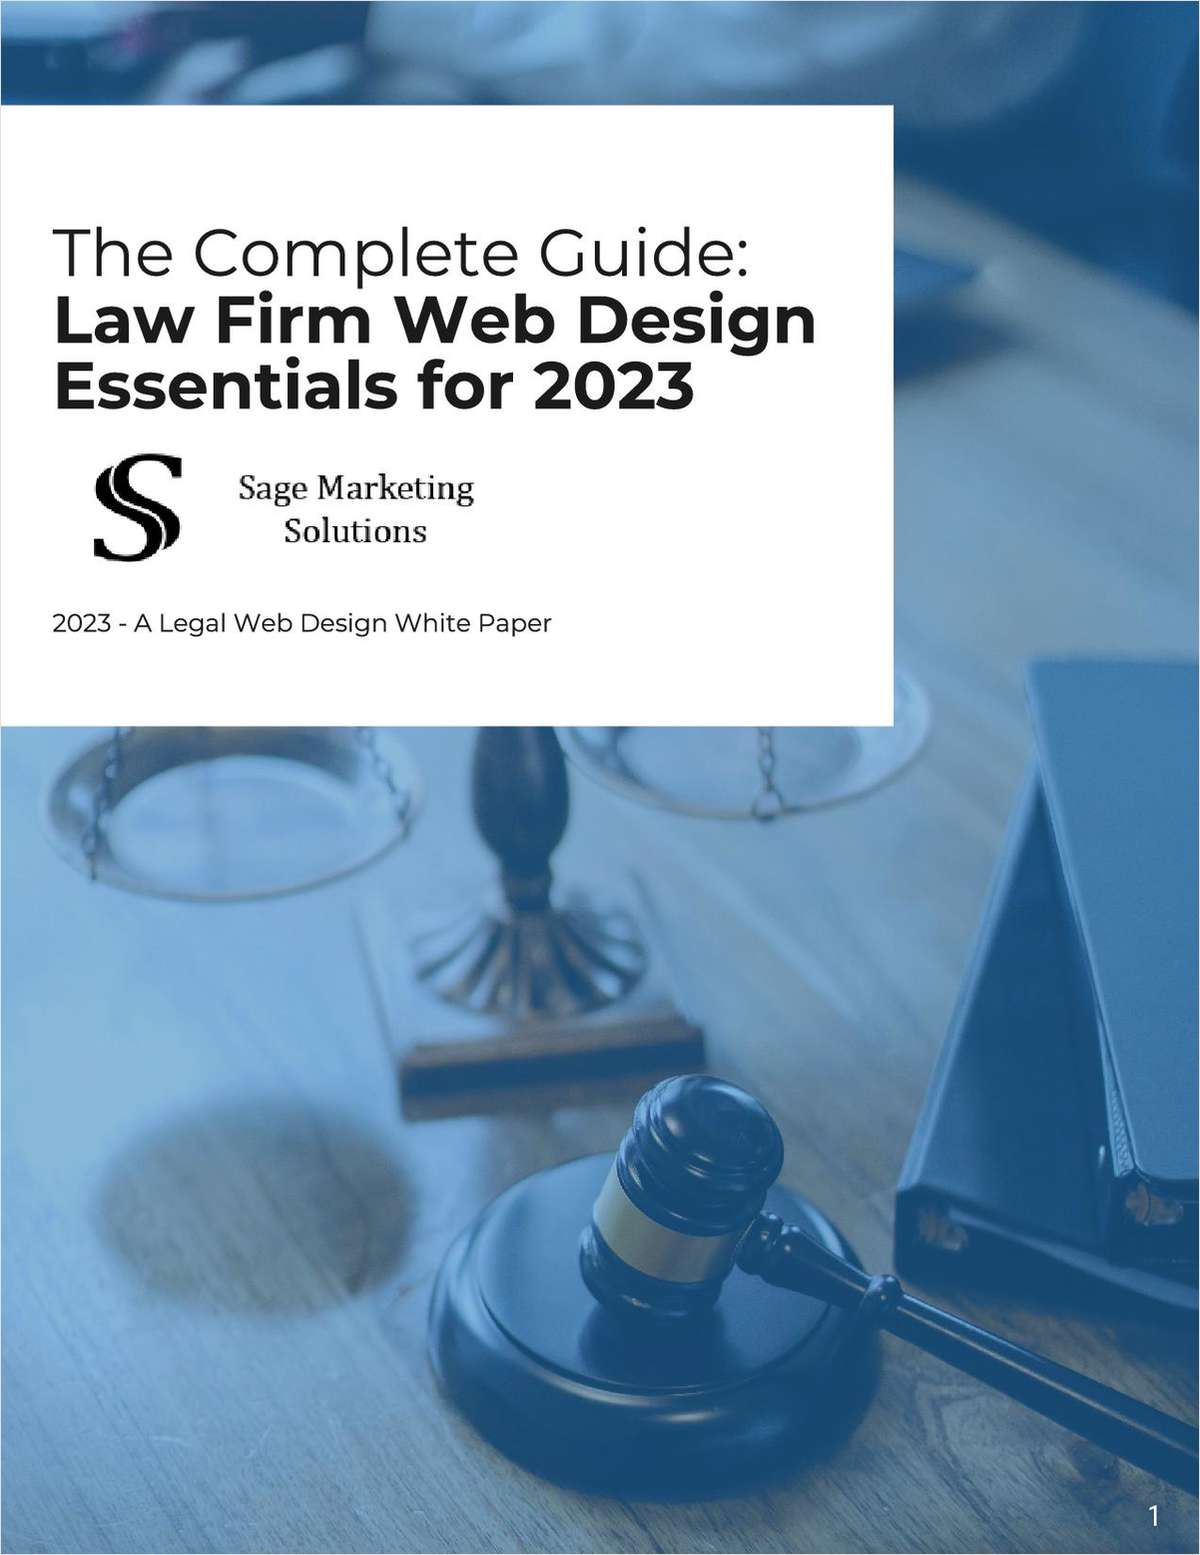 The Complete Guide: Law Firm Website Essentials for 2023